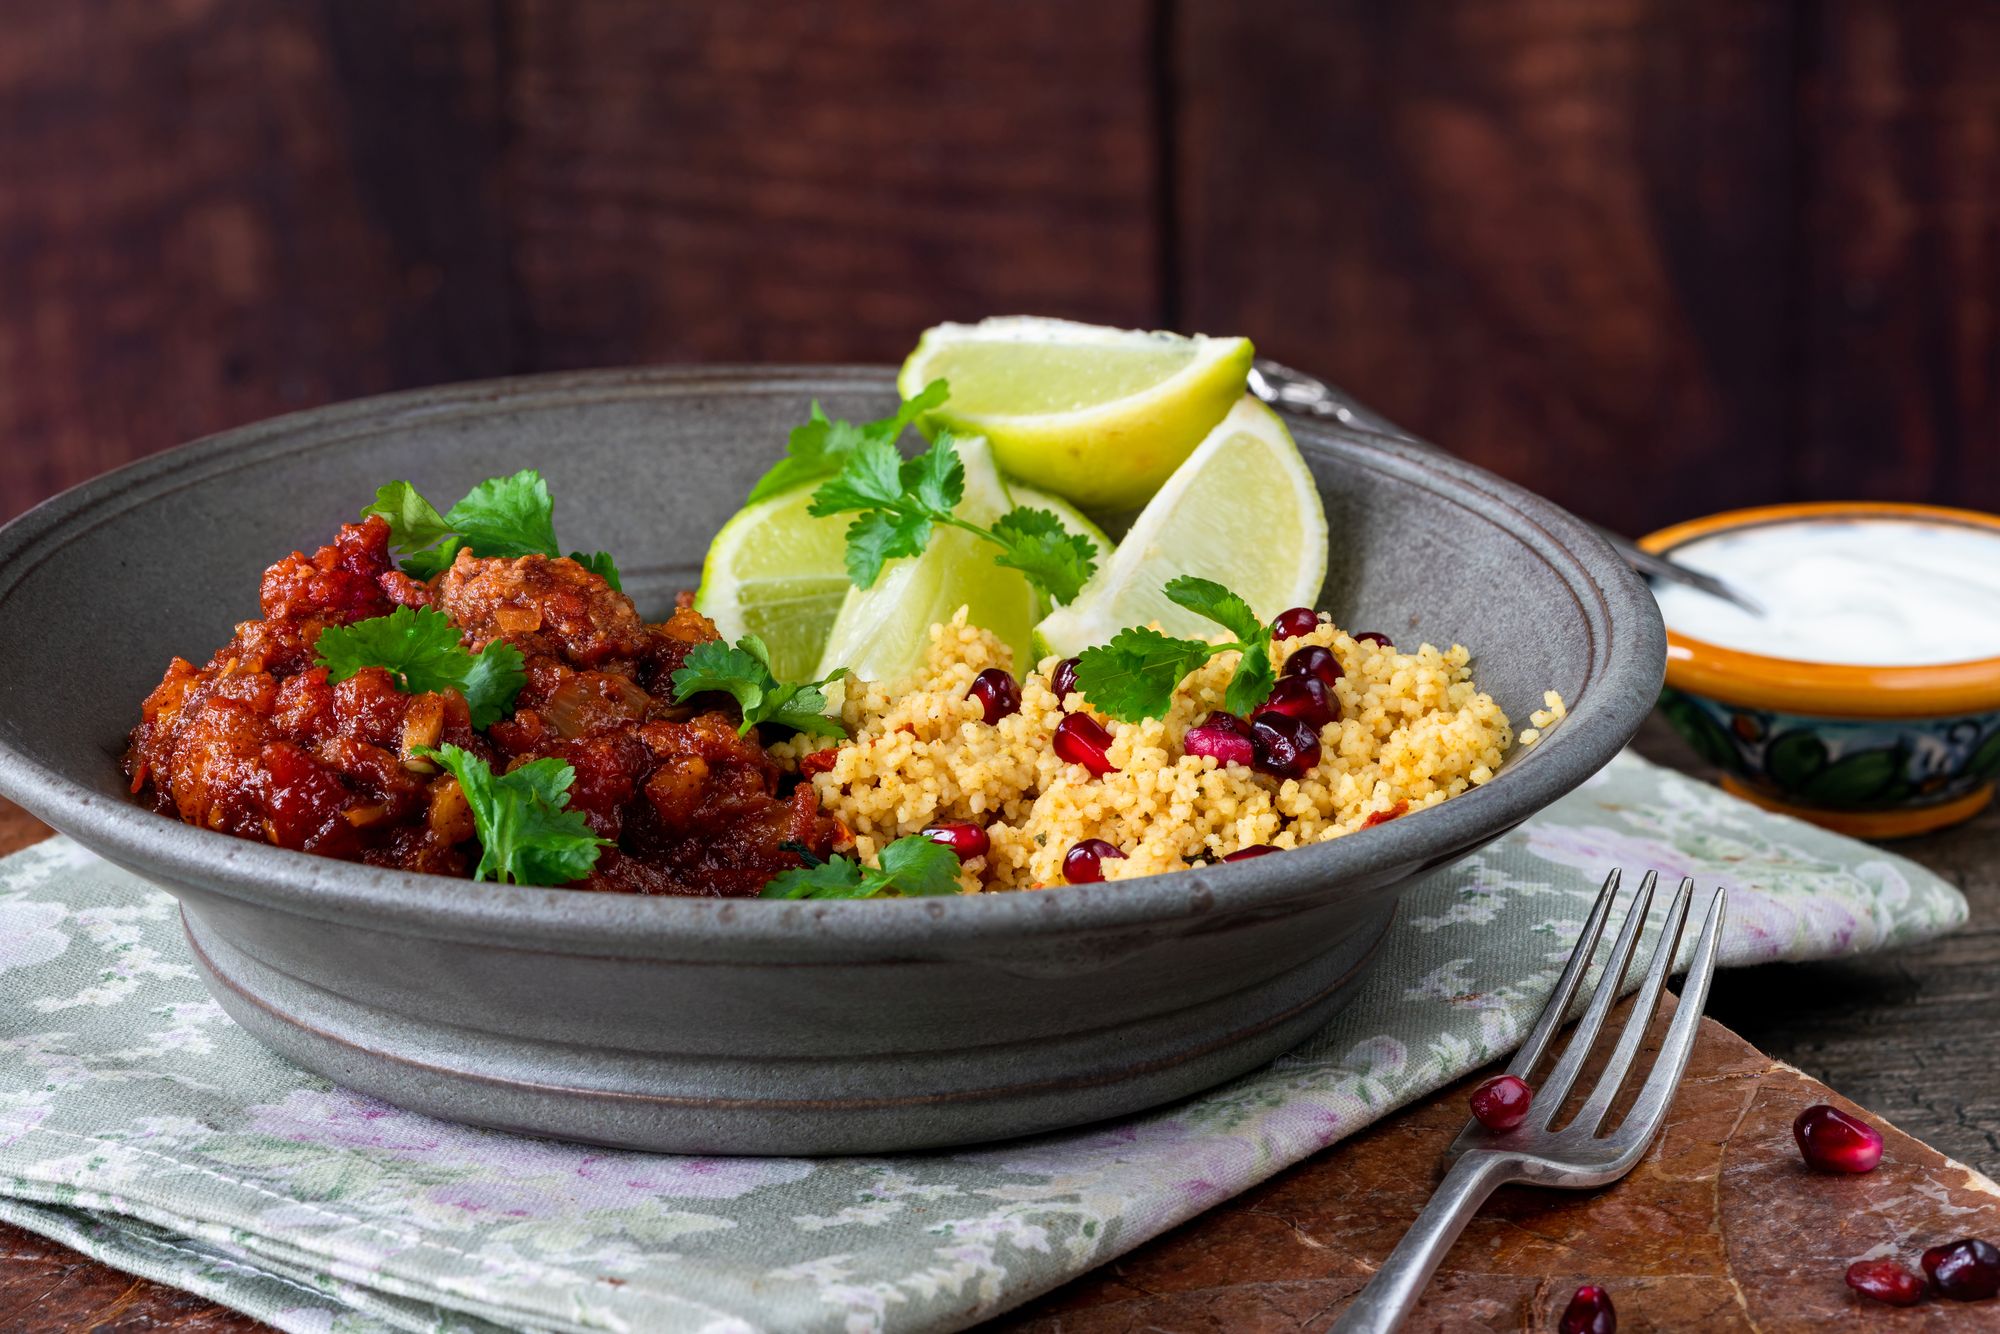 Pomegranate Chicken and Couscous